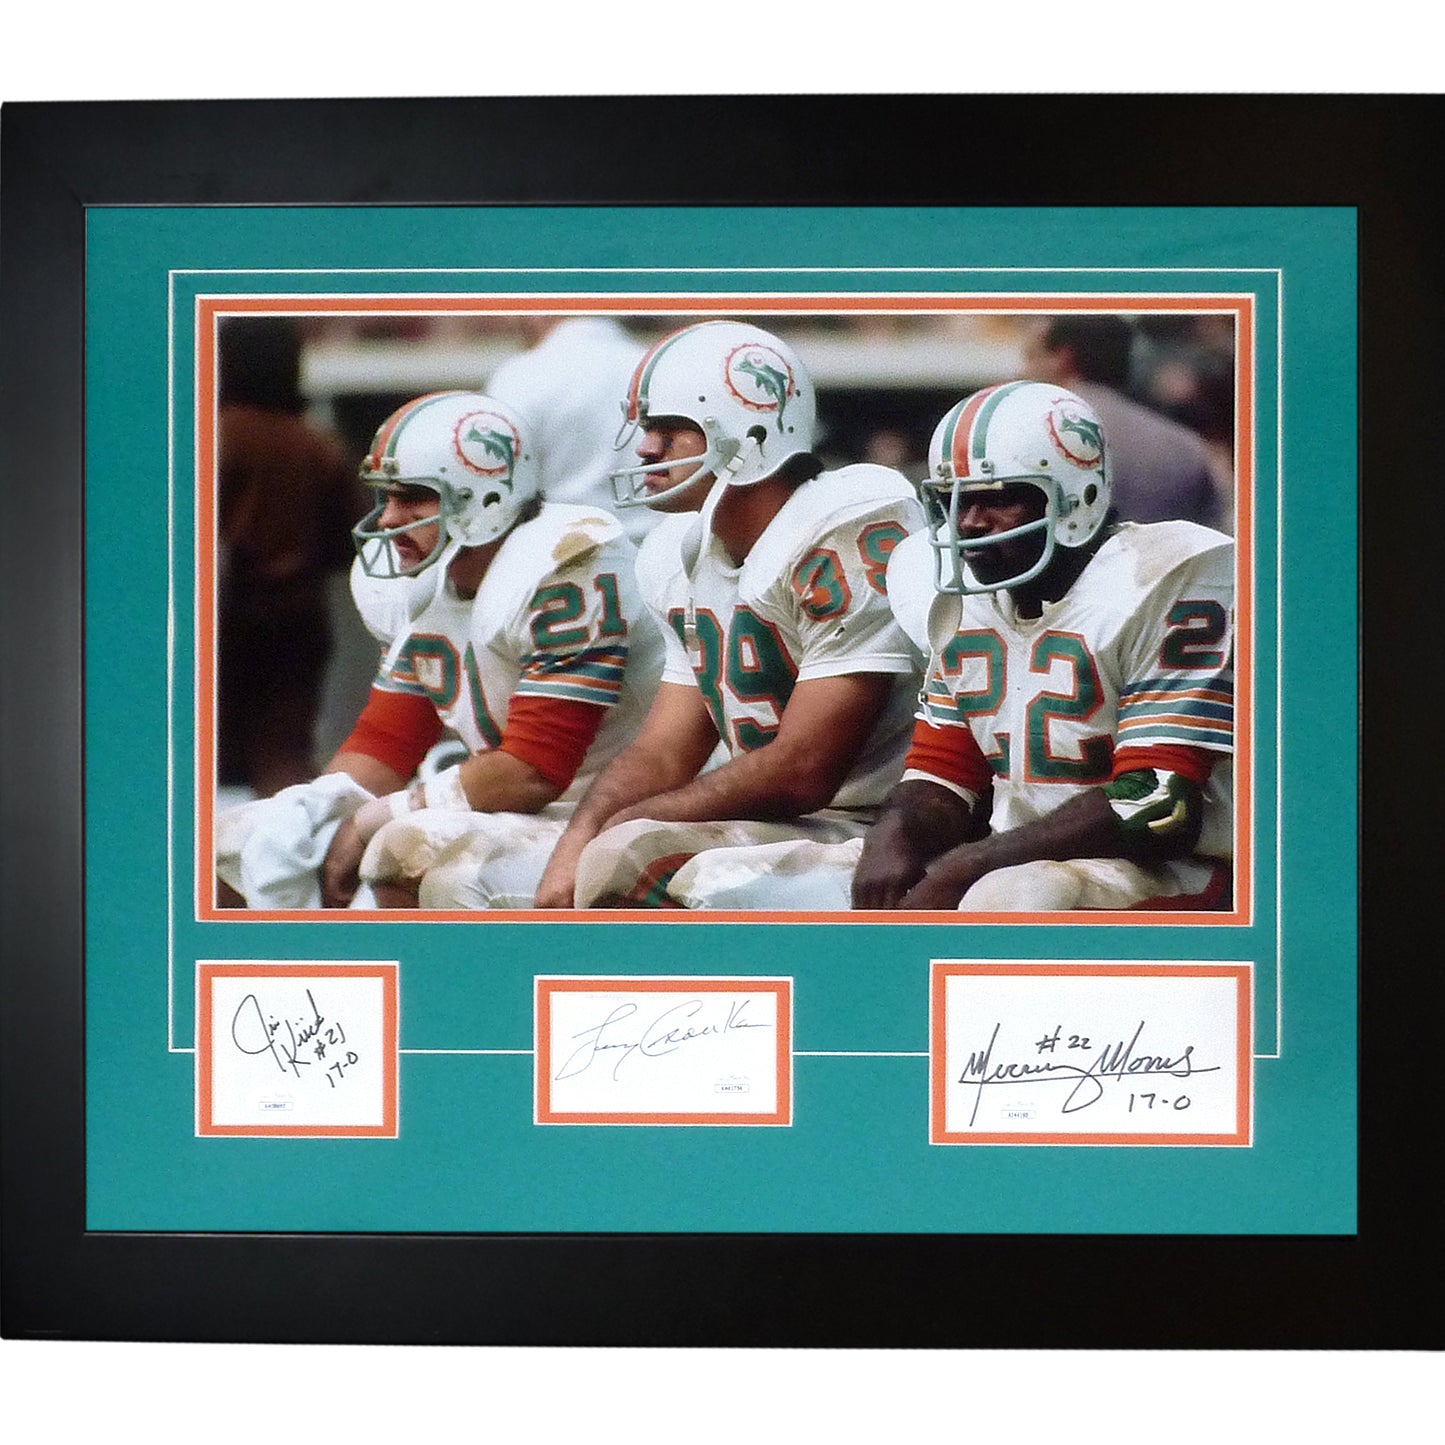 Jim Kiick , Larry Csonka And Mercury Morris Deluxe Framed Miami Dolphins 12x18 Photo with Autographs– JSA